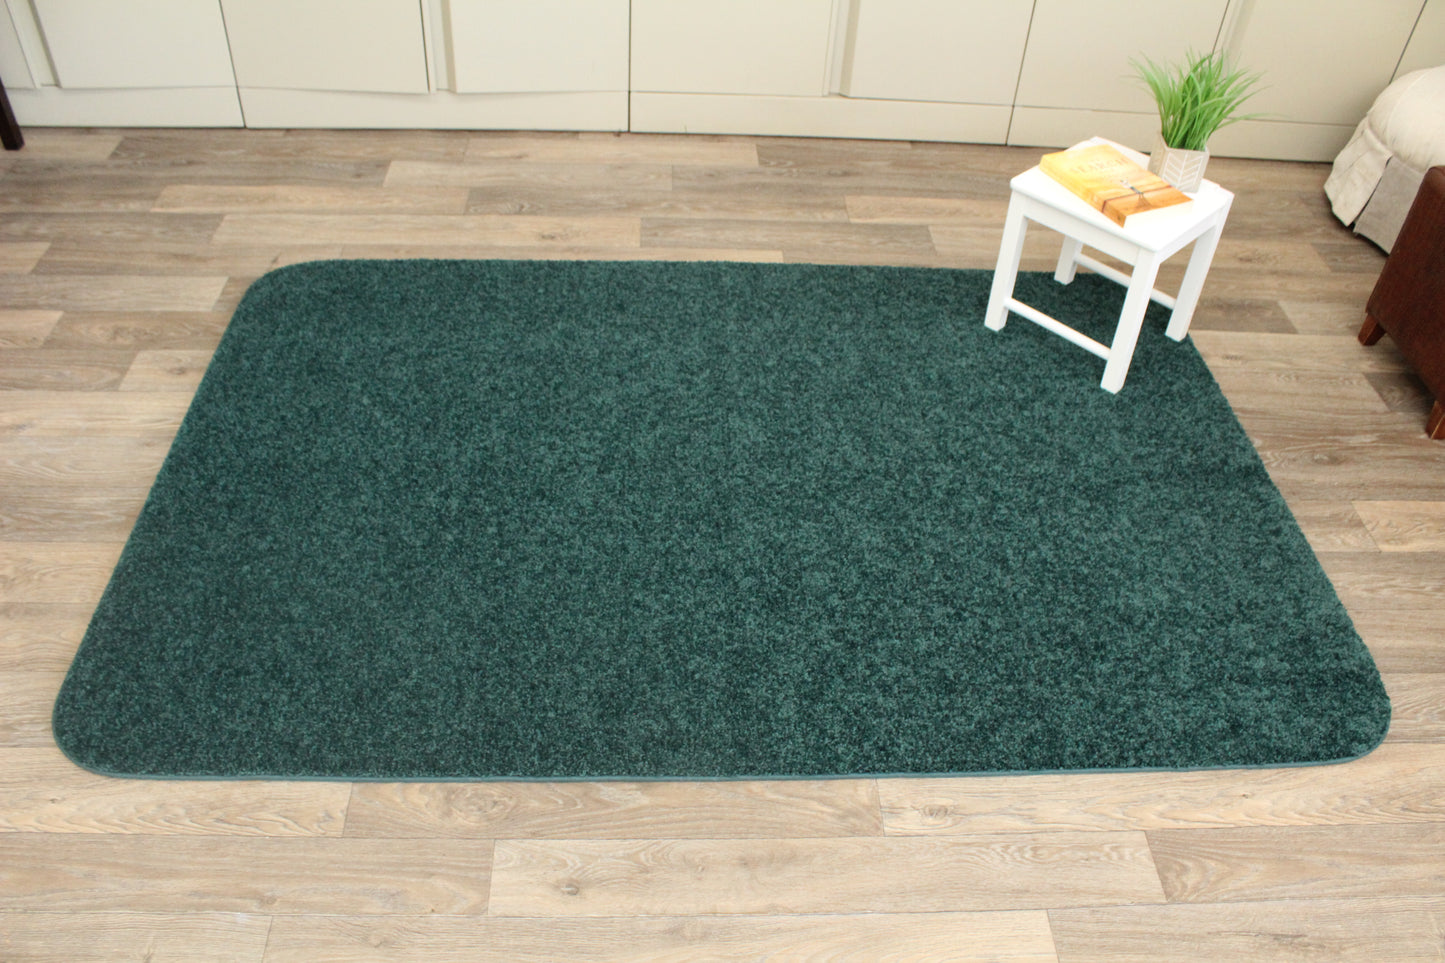 Pine Green Area Rug with side table